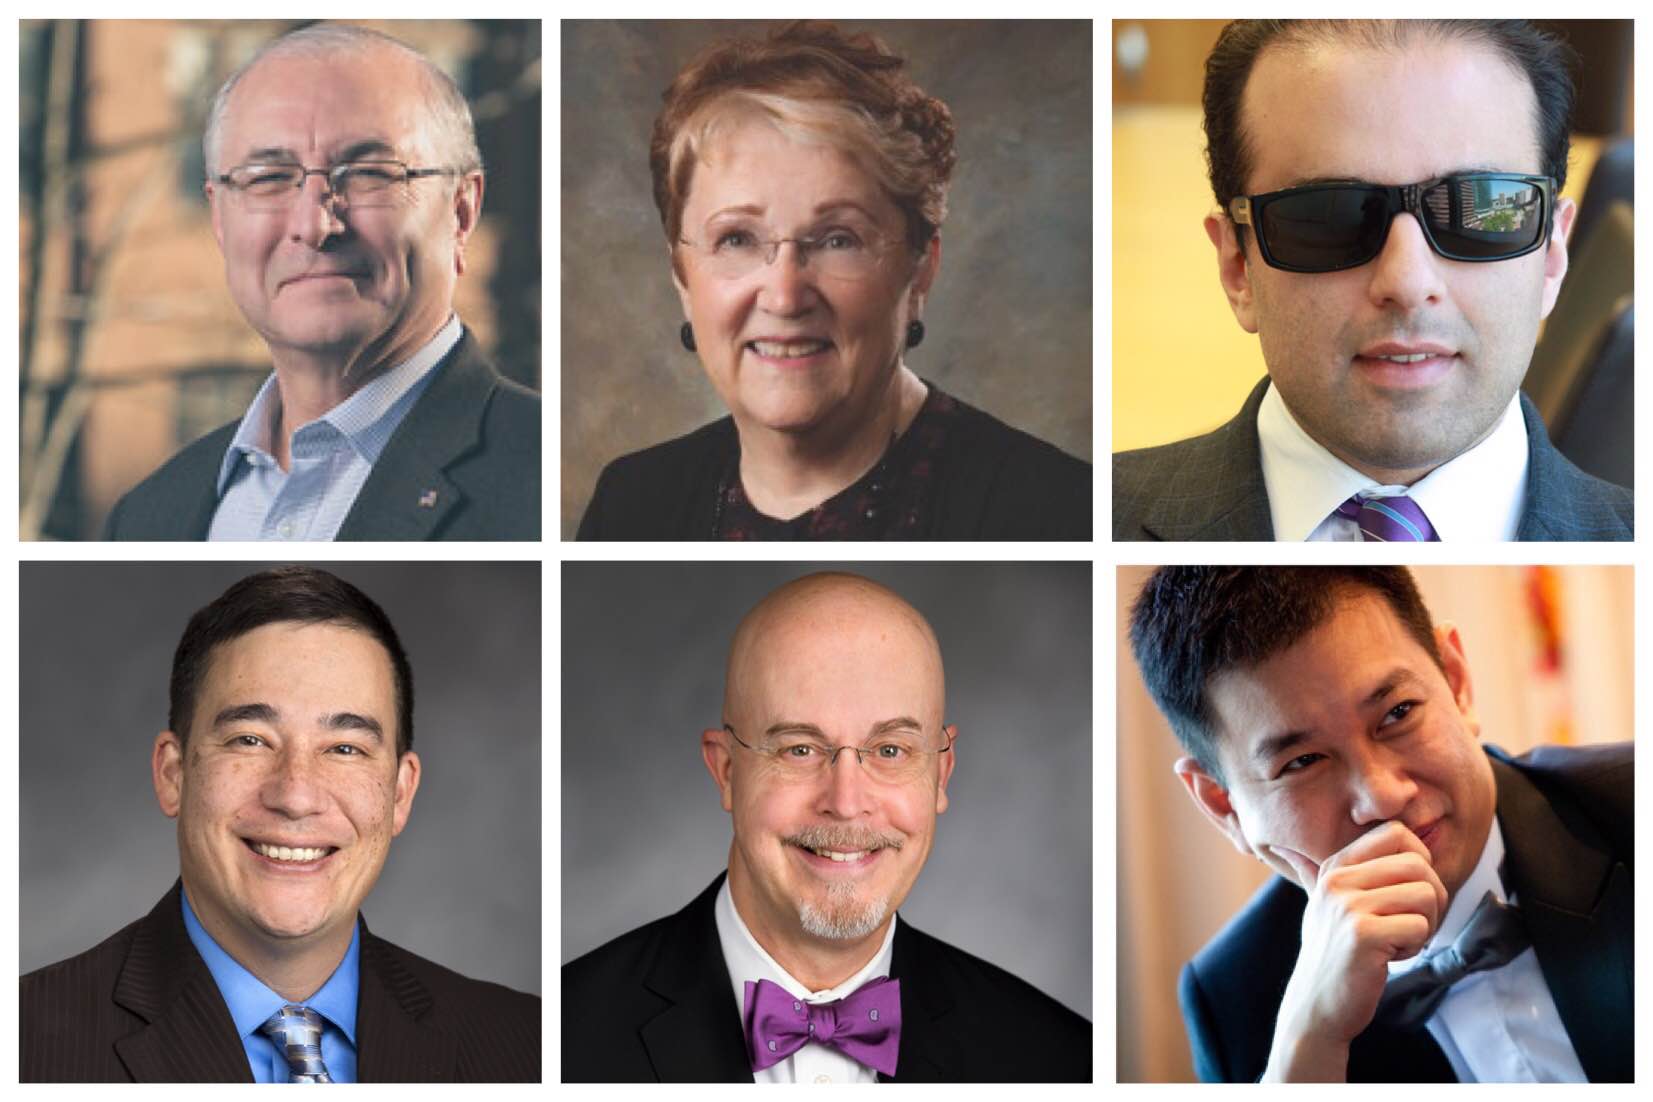 The six leading candidates for Lieutenant Governor (left to right): Javier Figueroa, Karen Fraser, Cyrus Habib, Steve Hobbs, Jim Moeller and Phillip Yin. (Courtesy photos.)